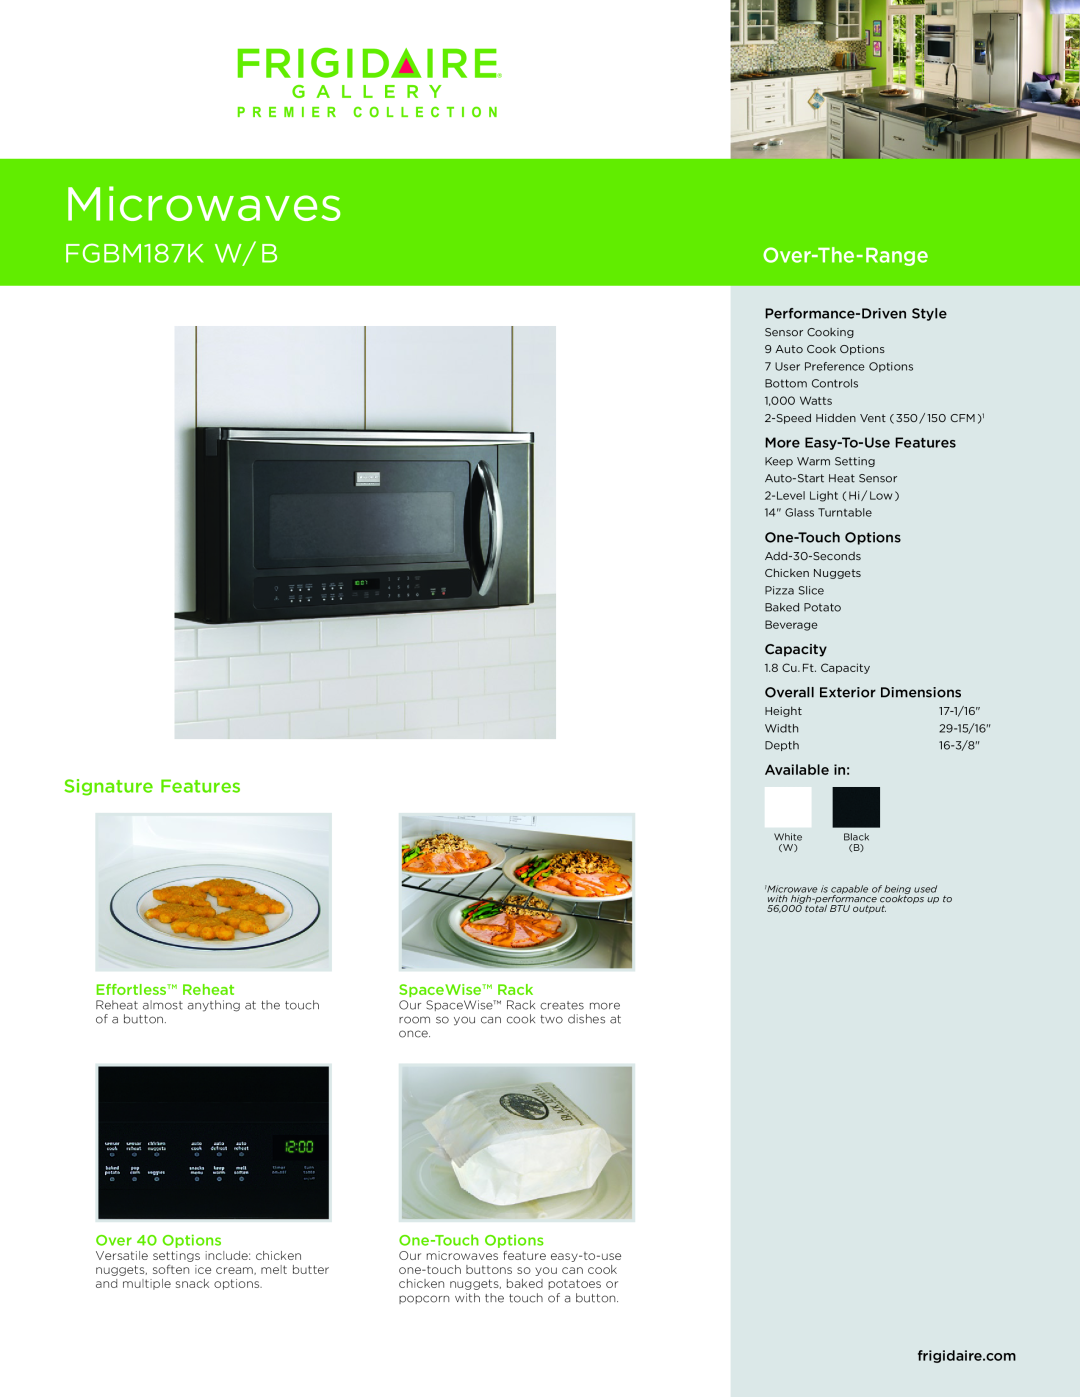 Frigidaire FGBM187K W/B dimensions Performance-DrivenStyle, More Easy-To-UseFeatures, One-TouchOptions, Capacity 